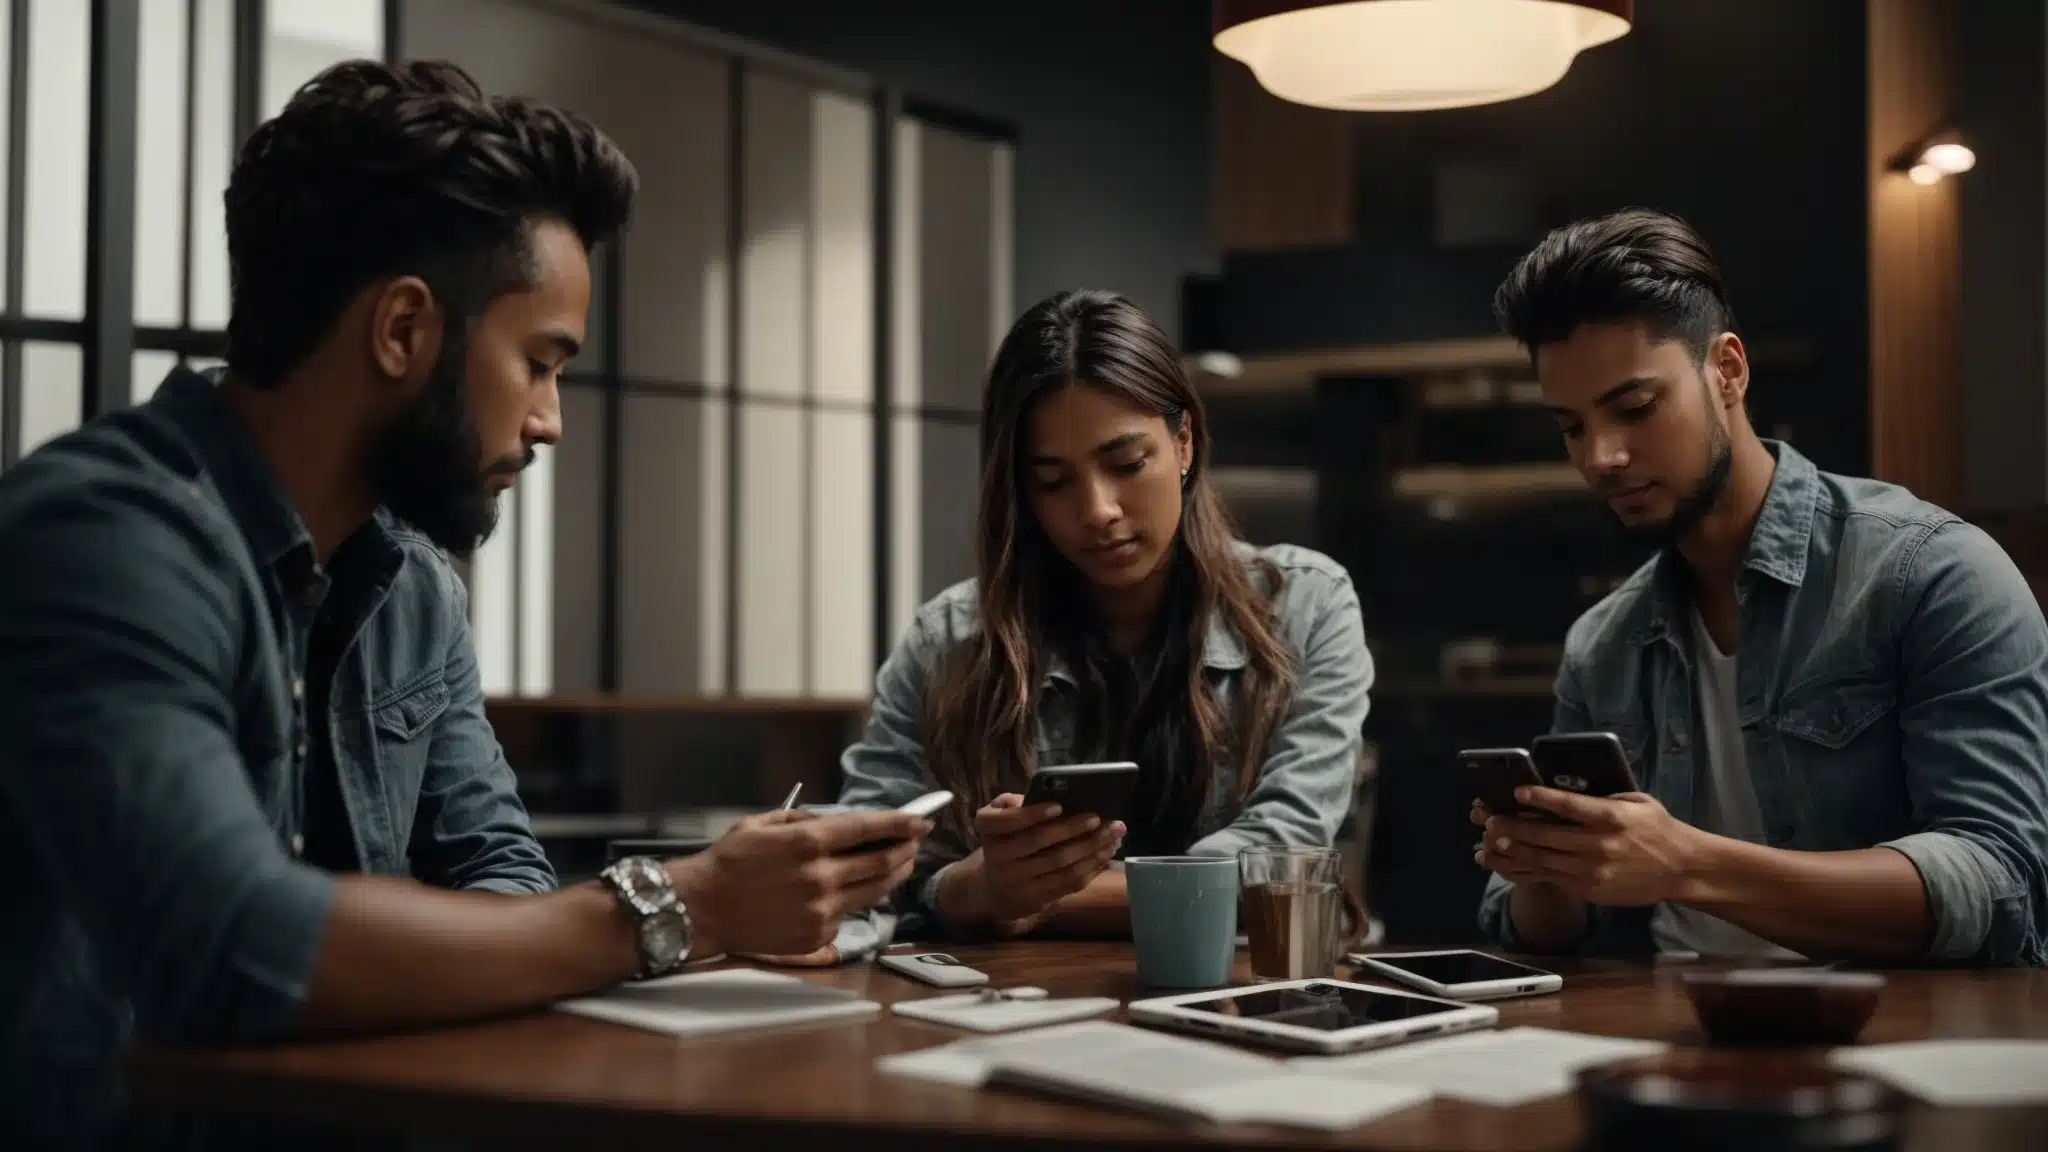 A Group Of Marketers Discuss Strategies Around A Table With Smartphones And A Tablet Displaying Social Media Applications.